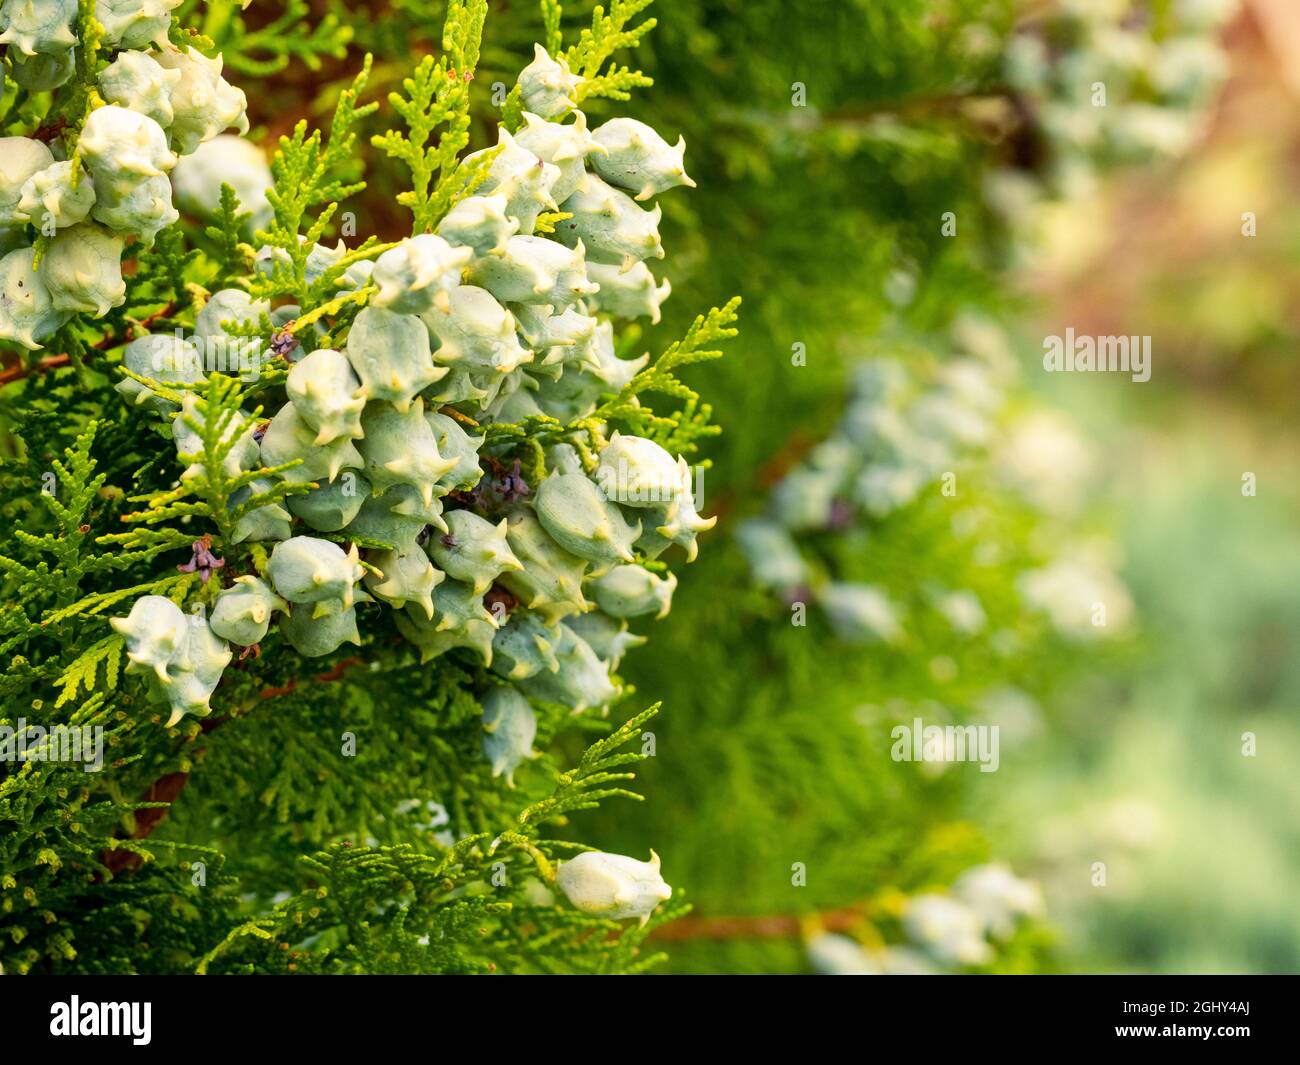 selective focus of thuja leafs and seeds (Platycladus orientalis ) with blurred background Stock Photo